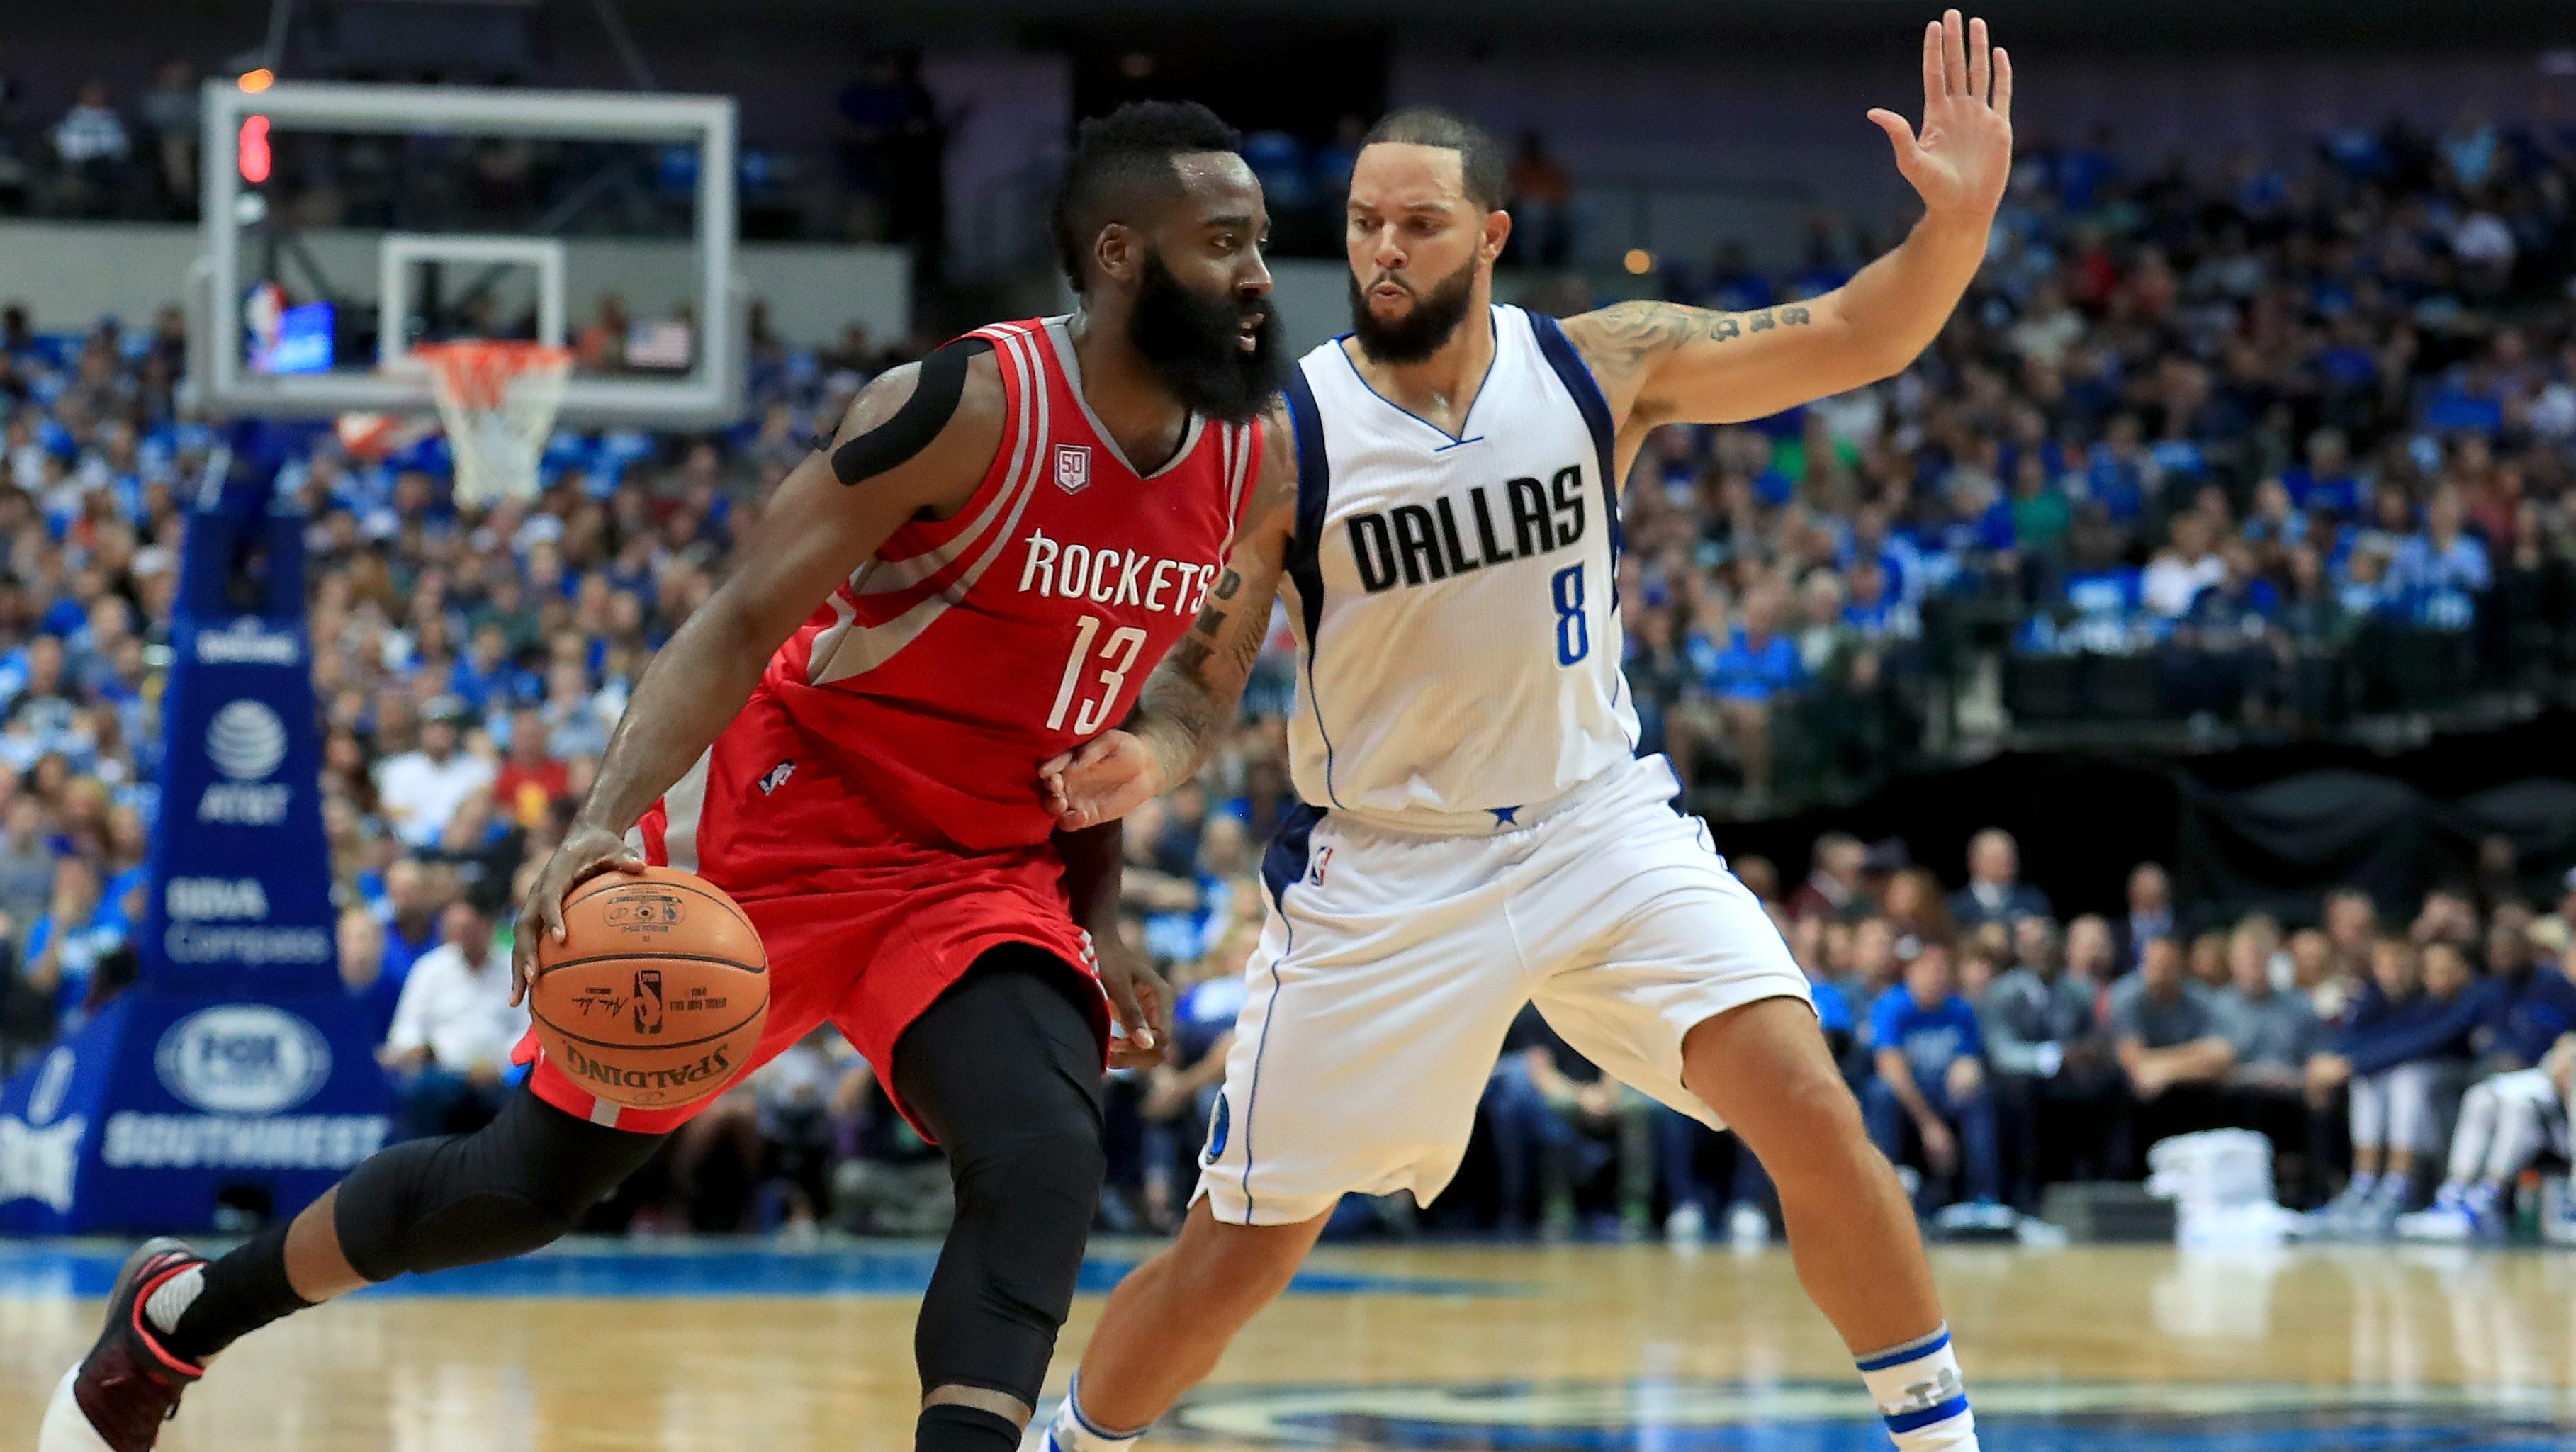 Rockets vs. Wizards Live Stream How to Watch Online